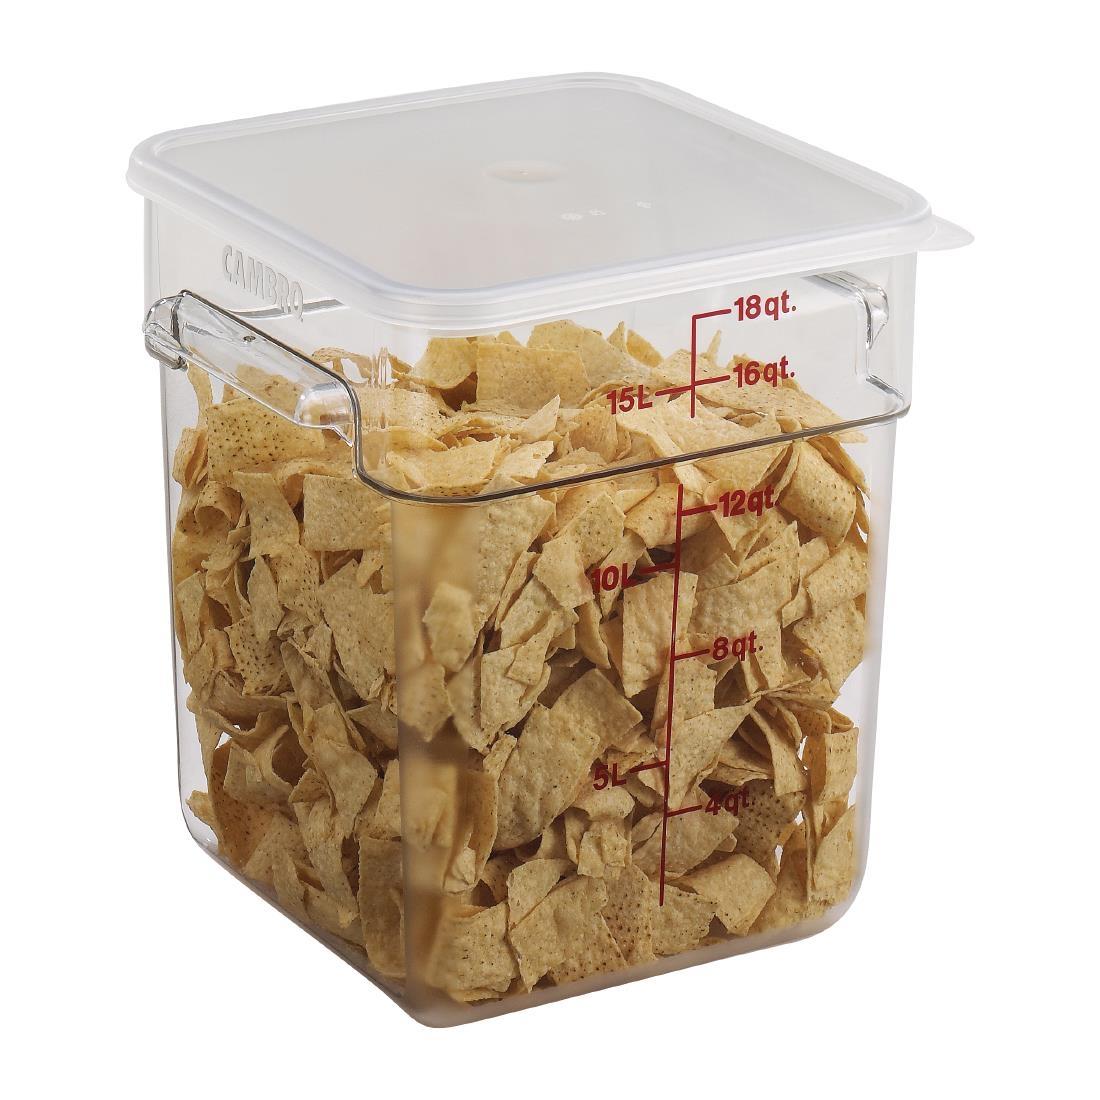 Cambro Square Polycarbonate Food Storage Container 17.2 Ltr - DT198  - 3